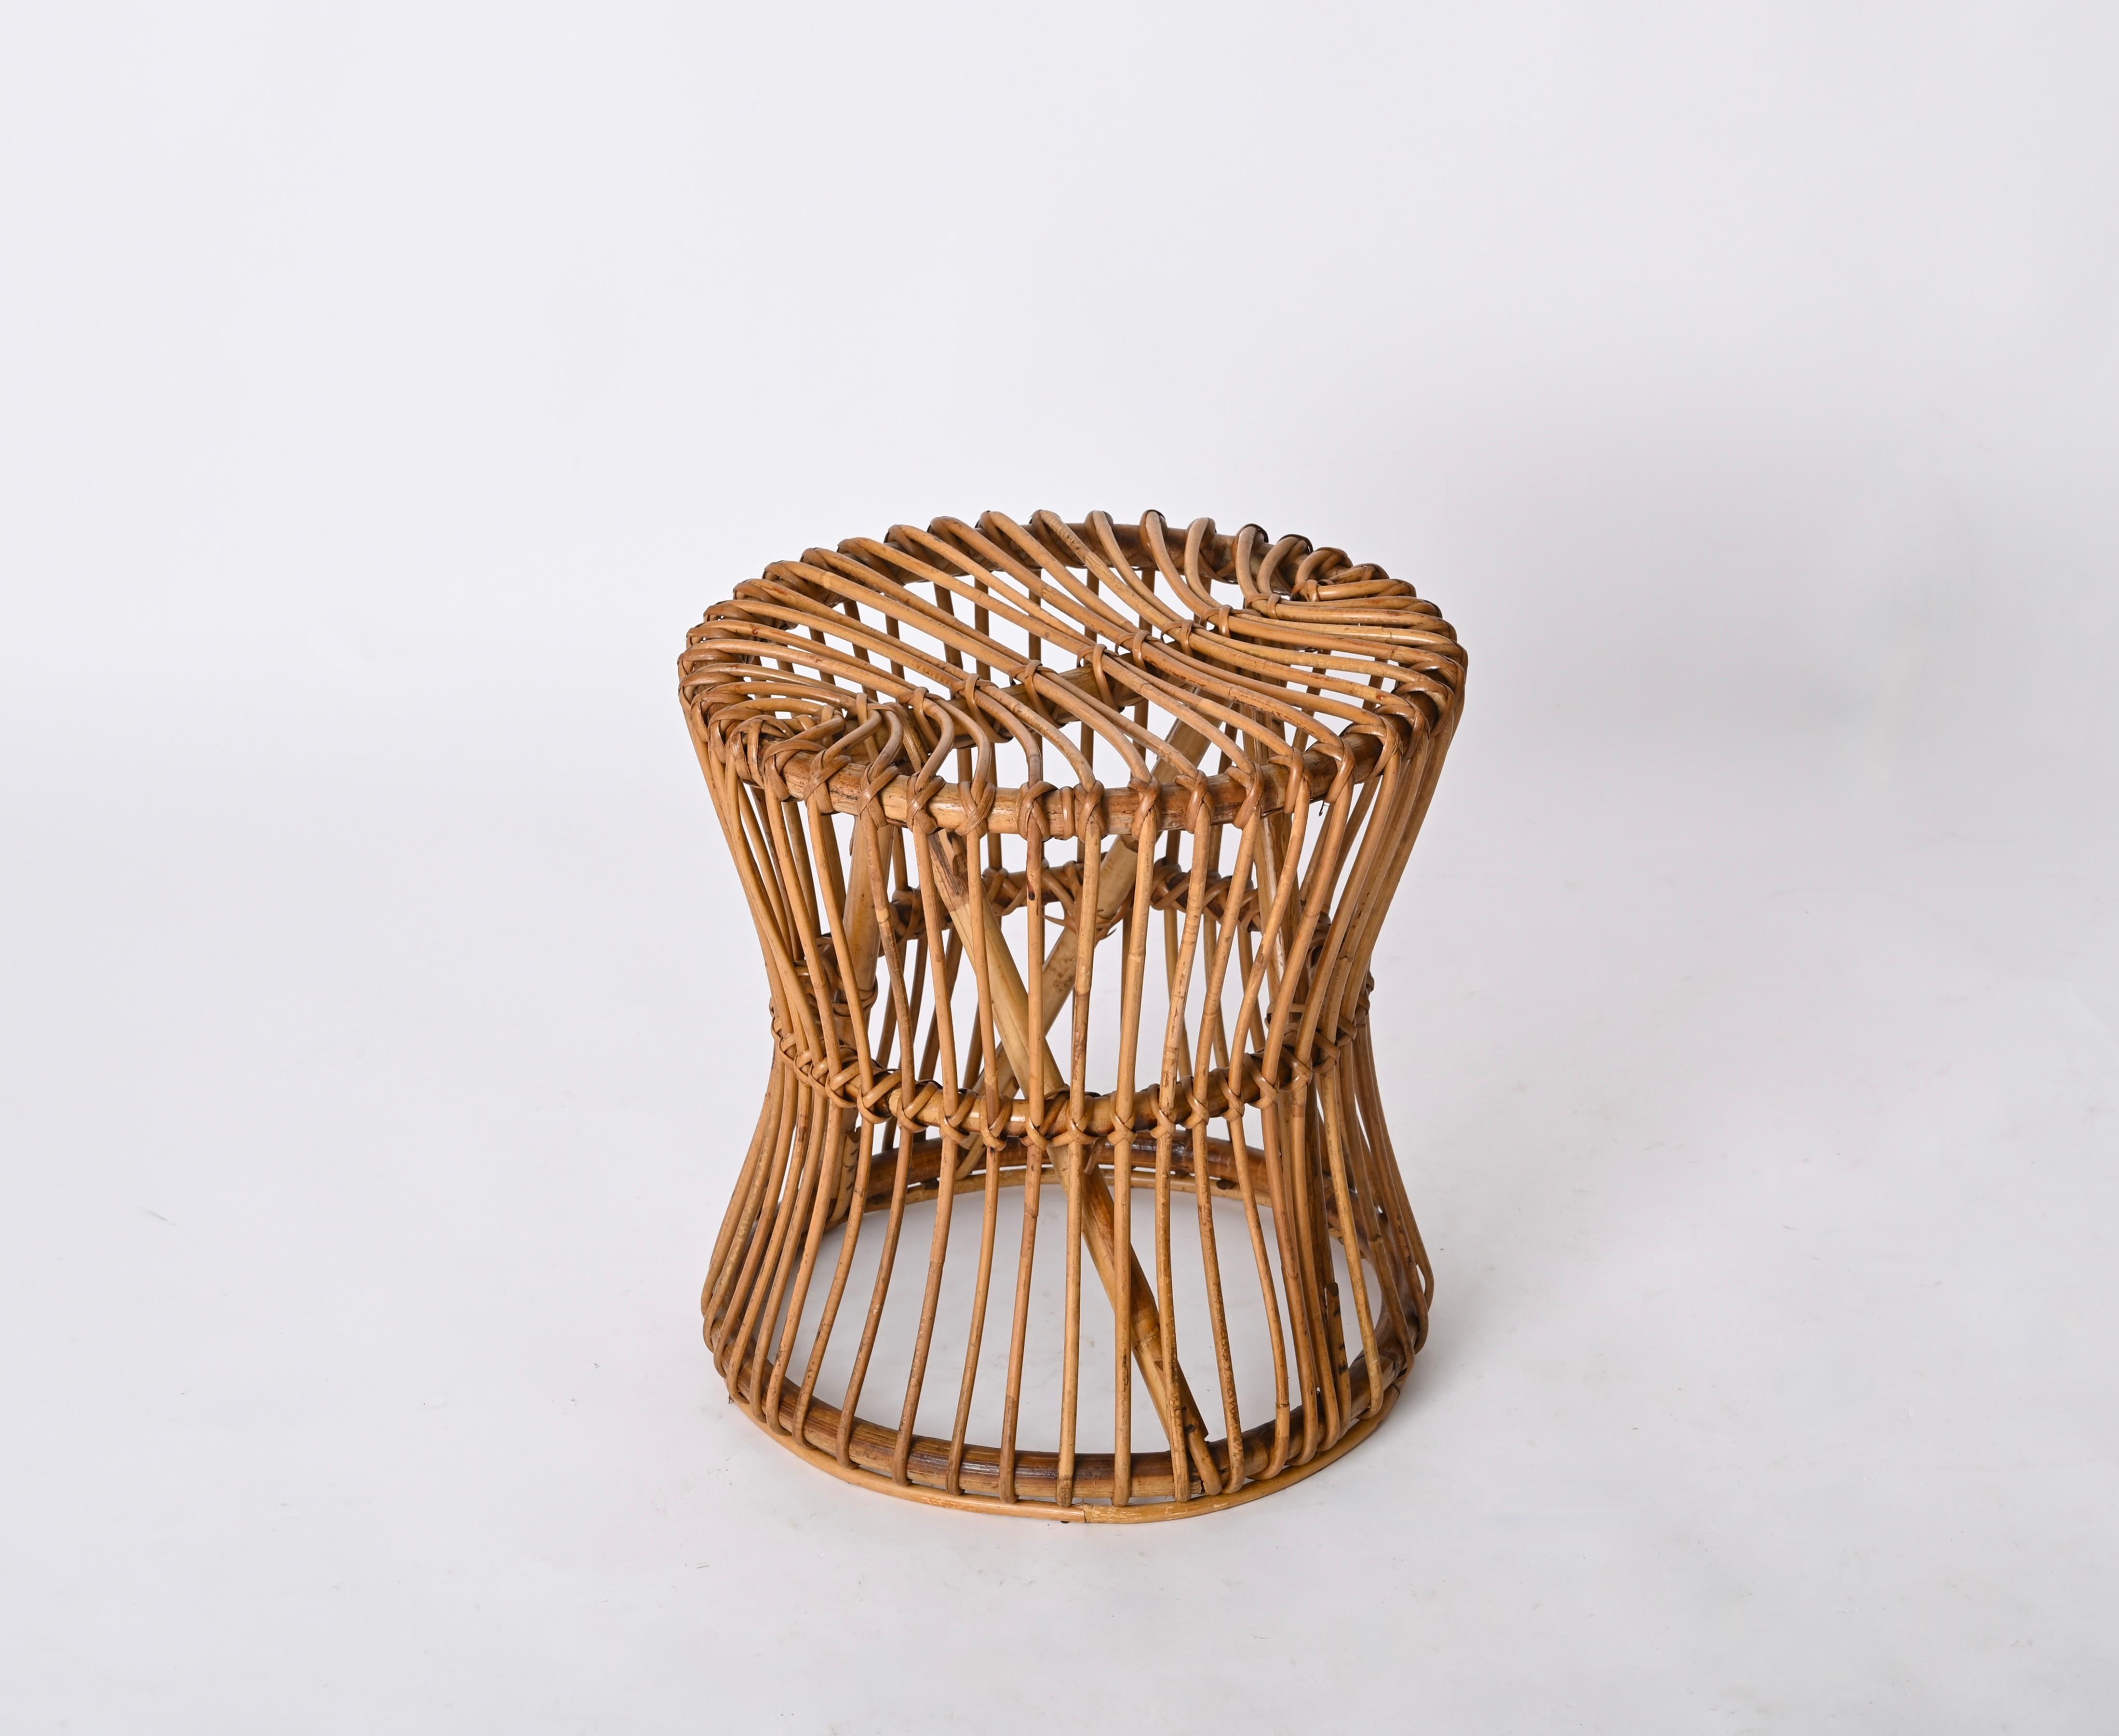 20th Century Midcentury French Riviera Pouf Stool in Rattan and Woven Wicker, Italy, 1960s For Sale